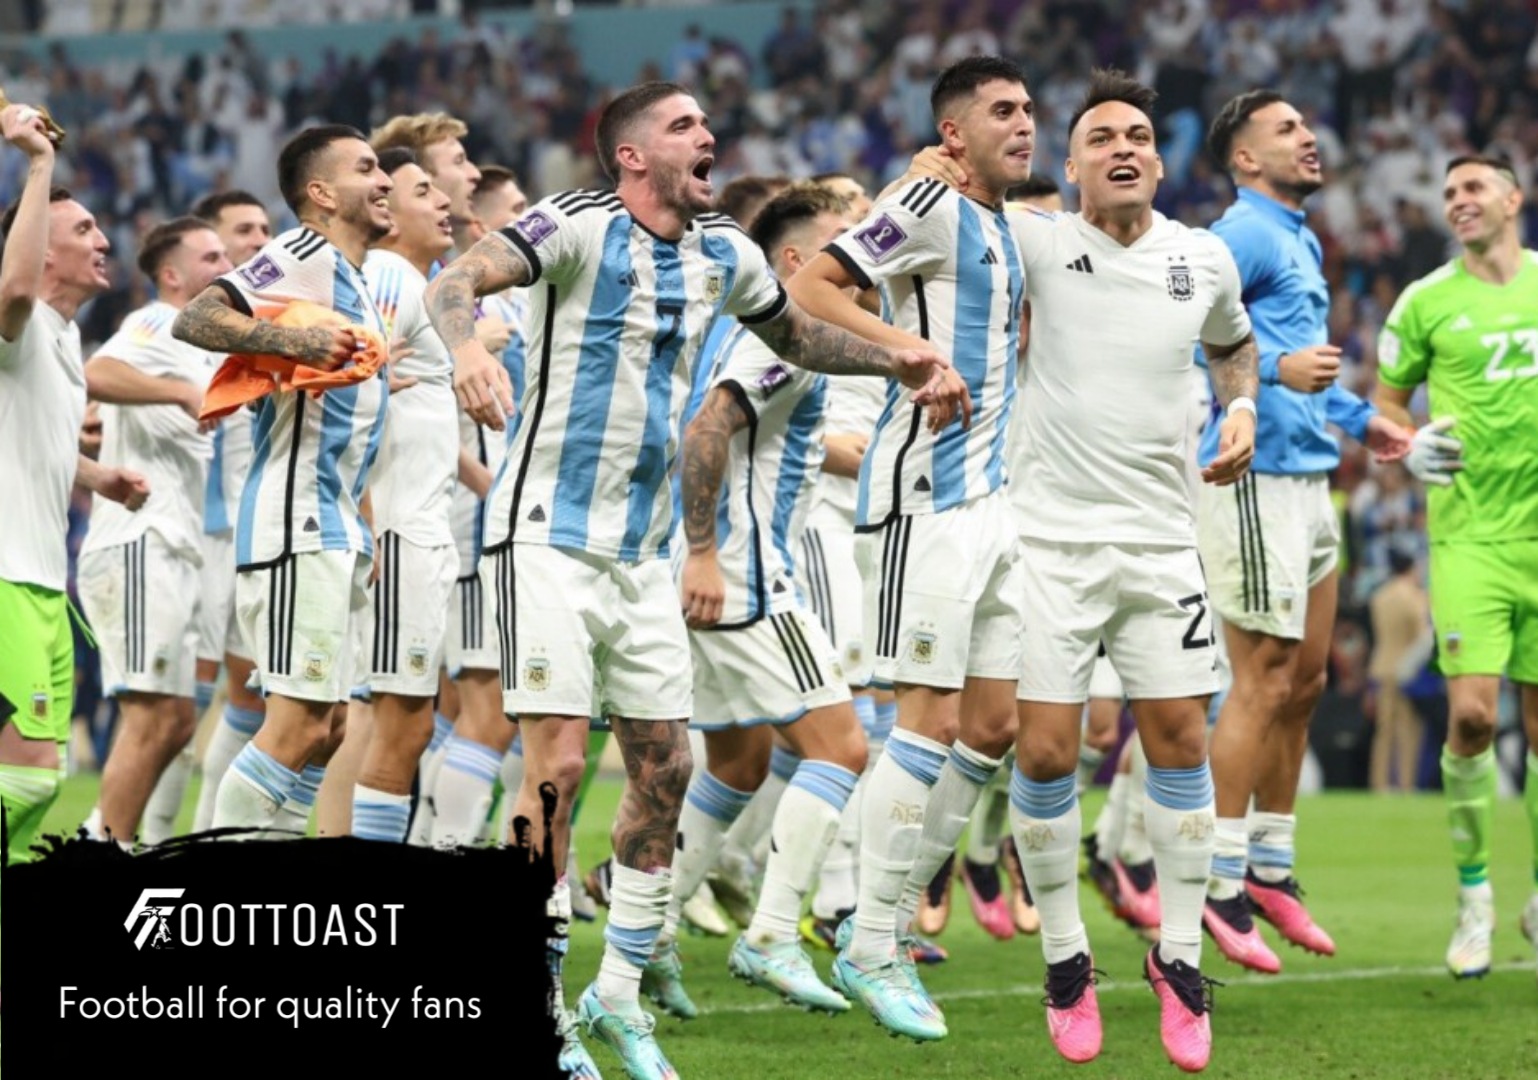 Argentina Into The World Cup Final: Croatia out